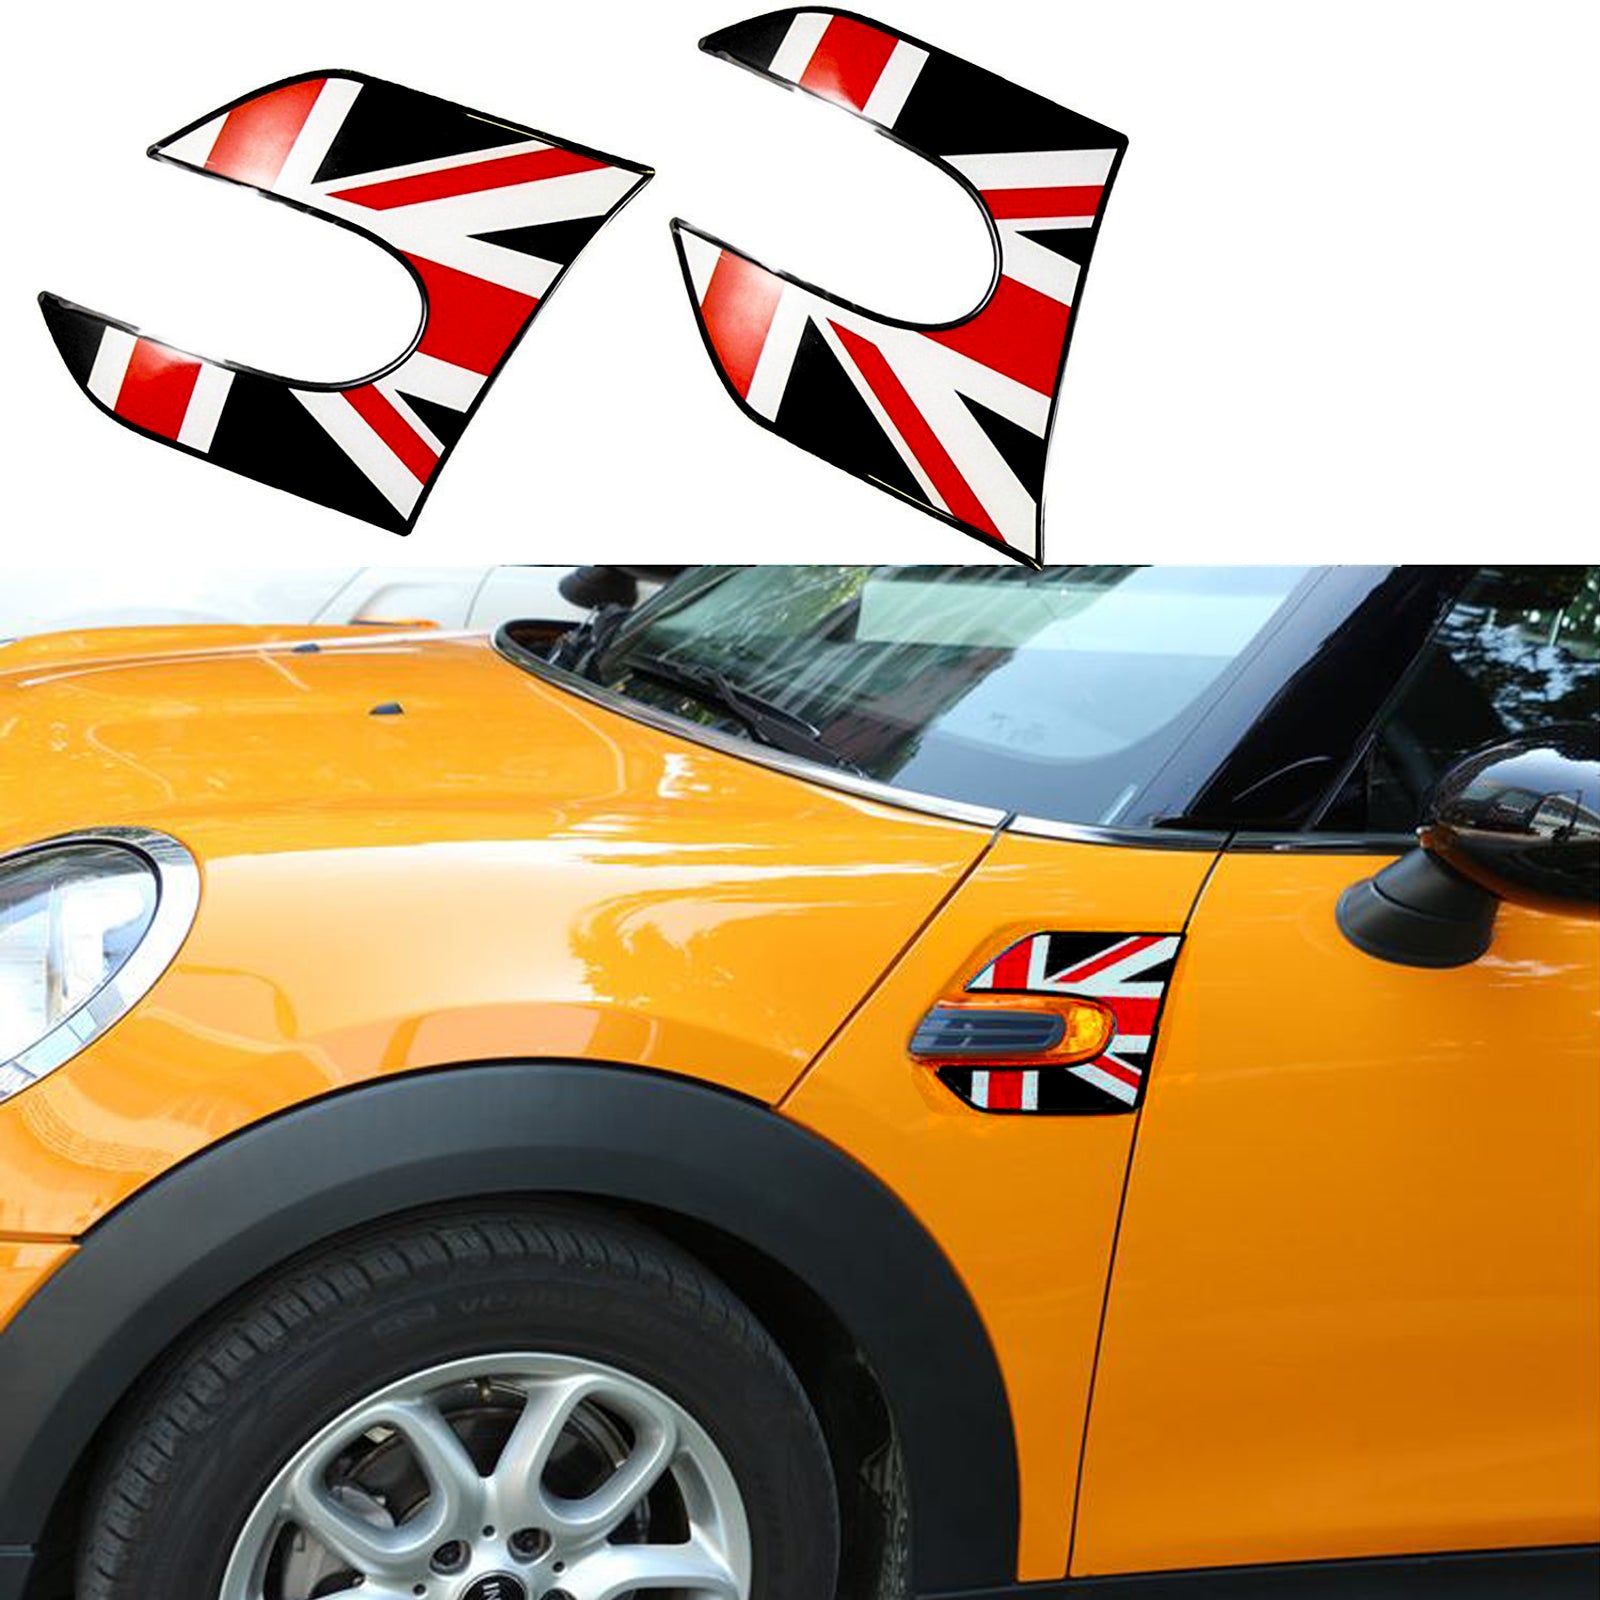 Fender Side Scuttles Stickers Decal For Mini Cooper S F56 2014+,F55 20